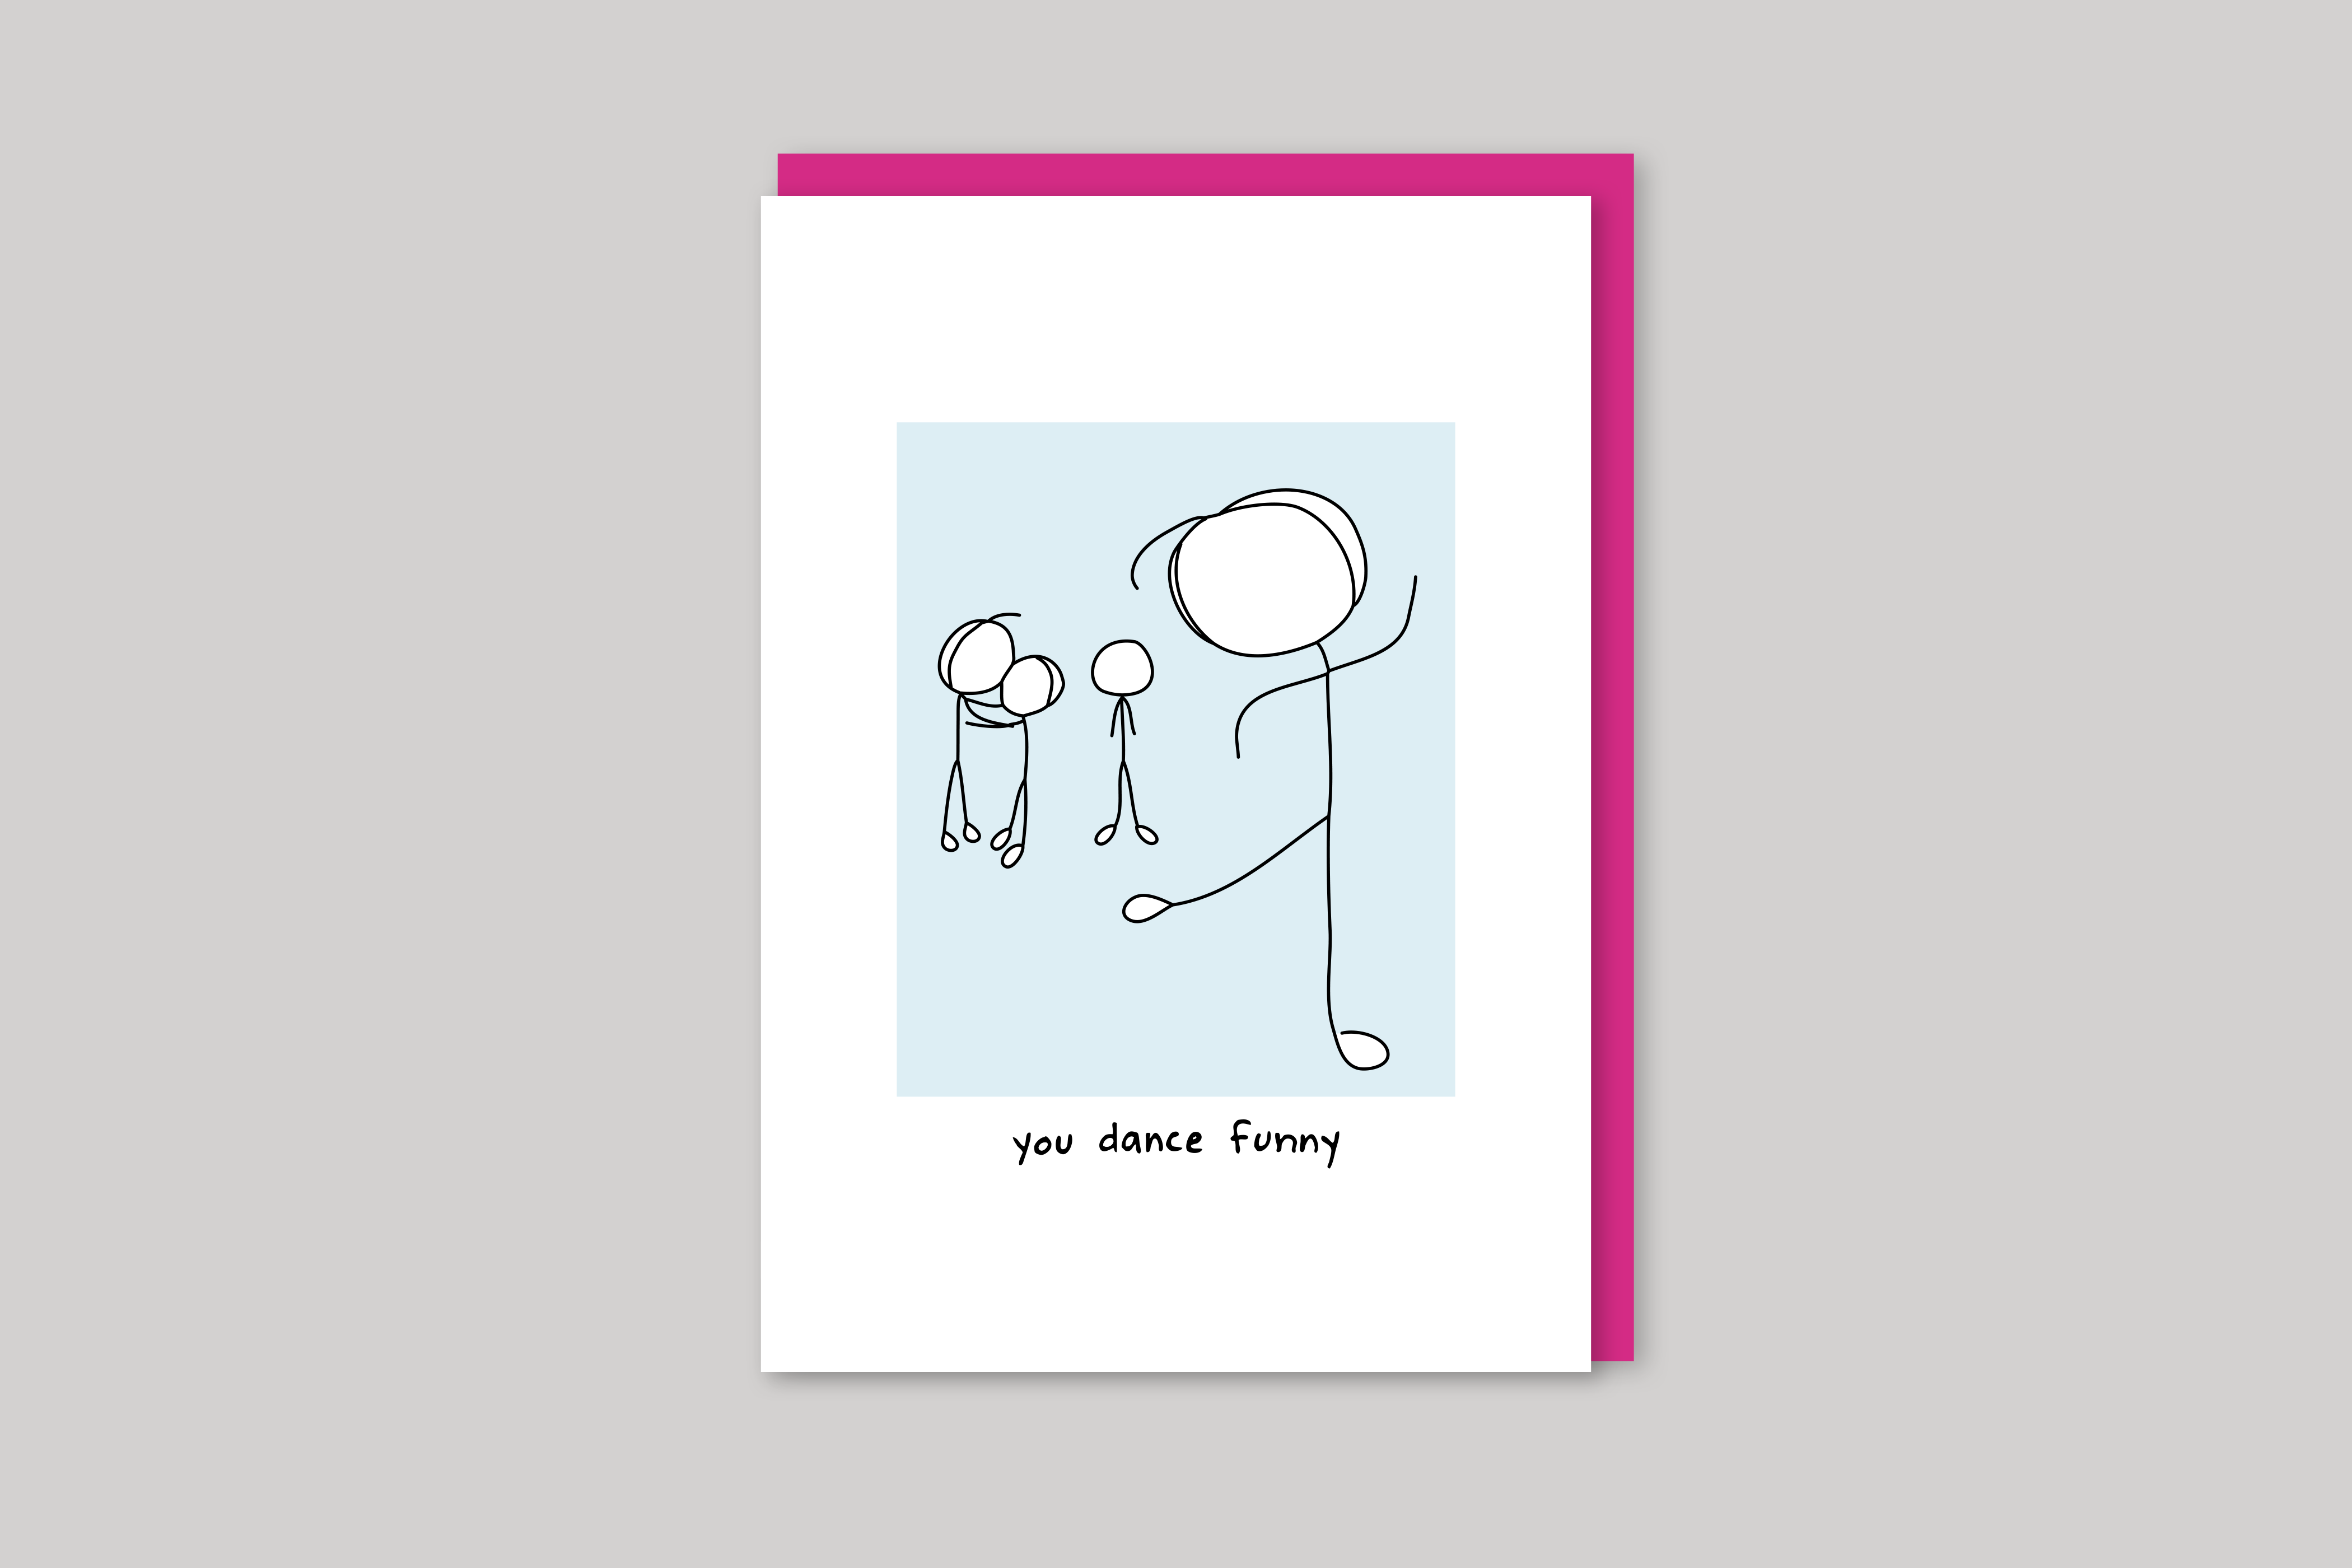 You Dance Funny humorous illustration from Mean Cards range of greeting cards by Icon, back page.